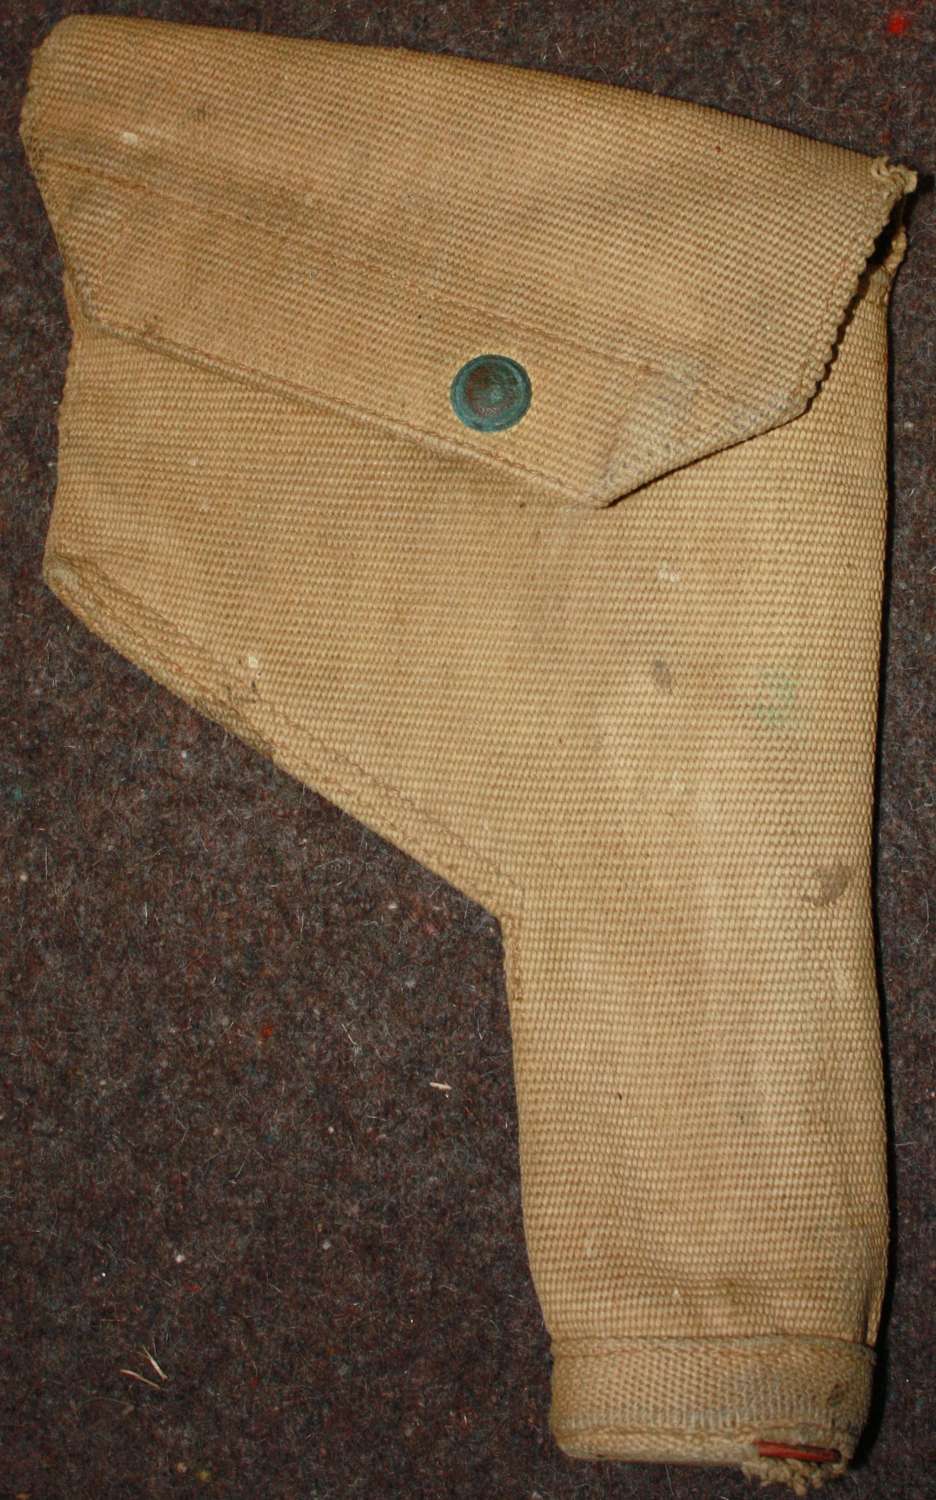 A GOOD USED 1938 DATED 37 PATTERN HOLSTER